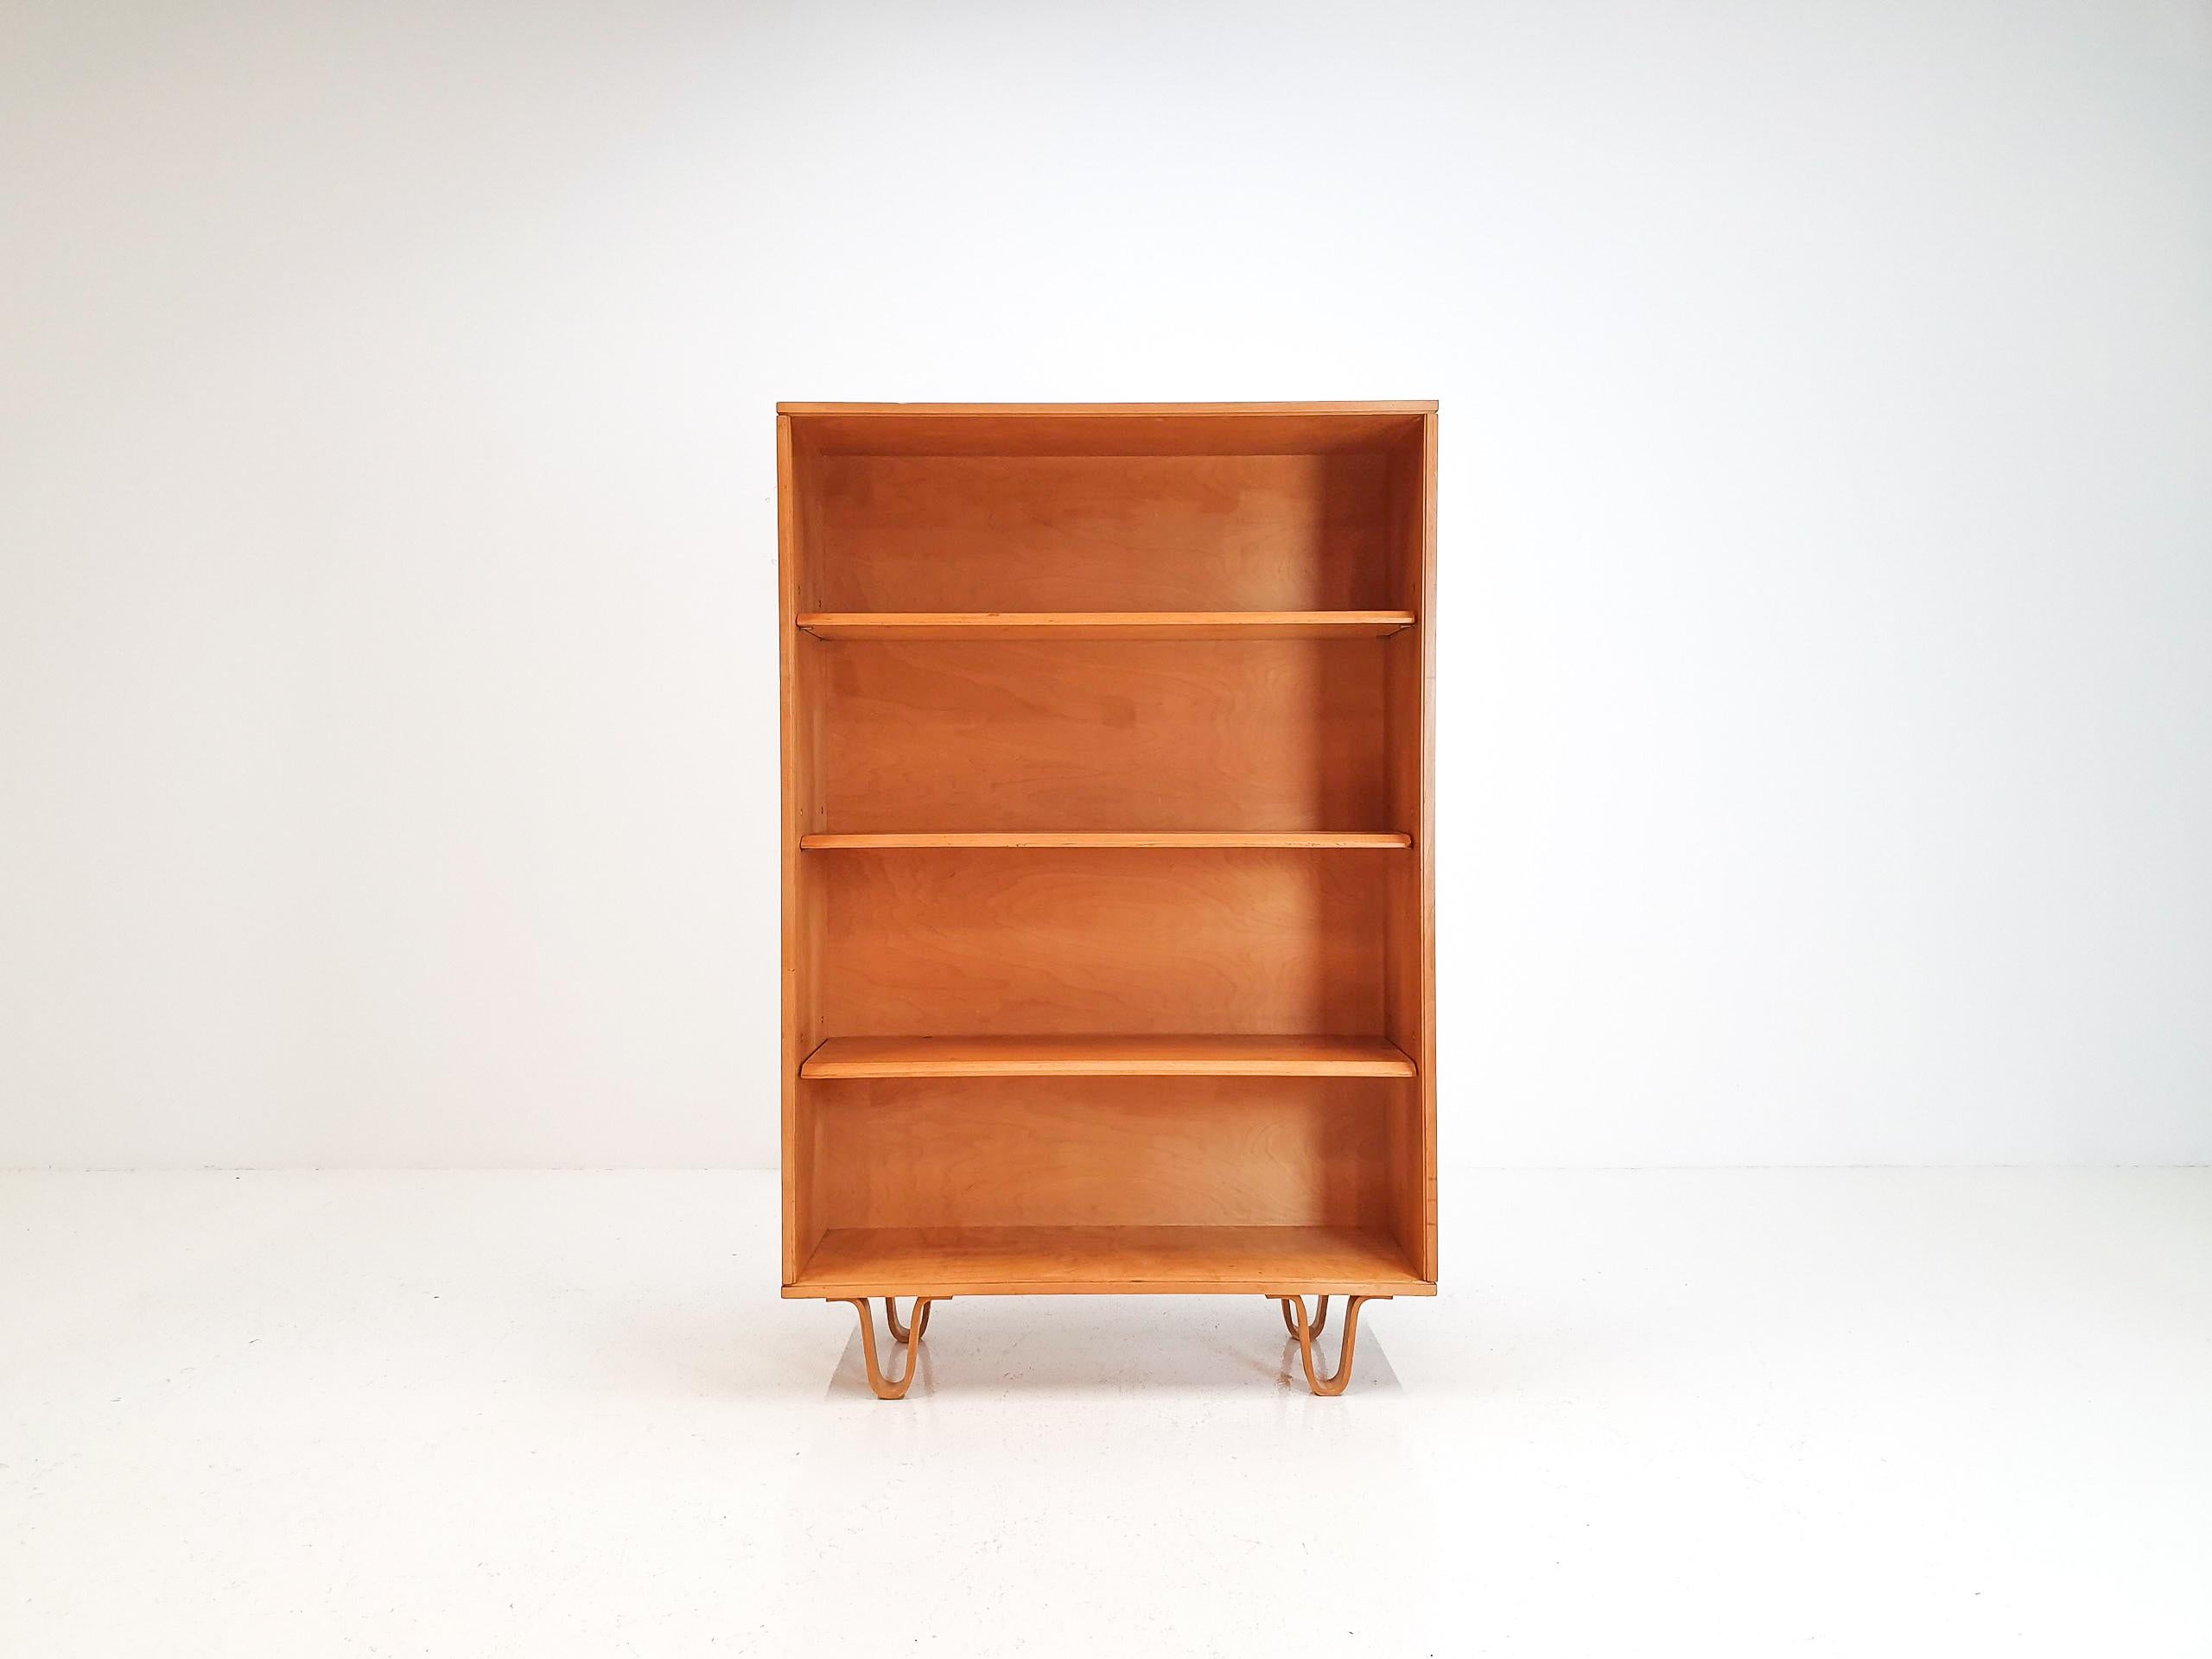 A Cees Braakman designed BB02 birch bookcase, part of the Combex range. An iconic design consisting of shelving and the Cees Braakman signature design feature the looped curved birch legs which make this range so famous.

The piece is in nice